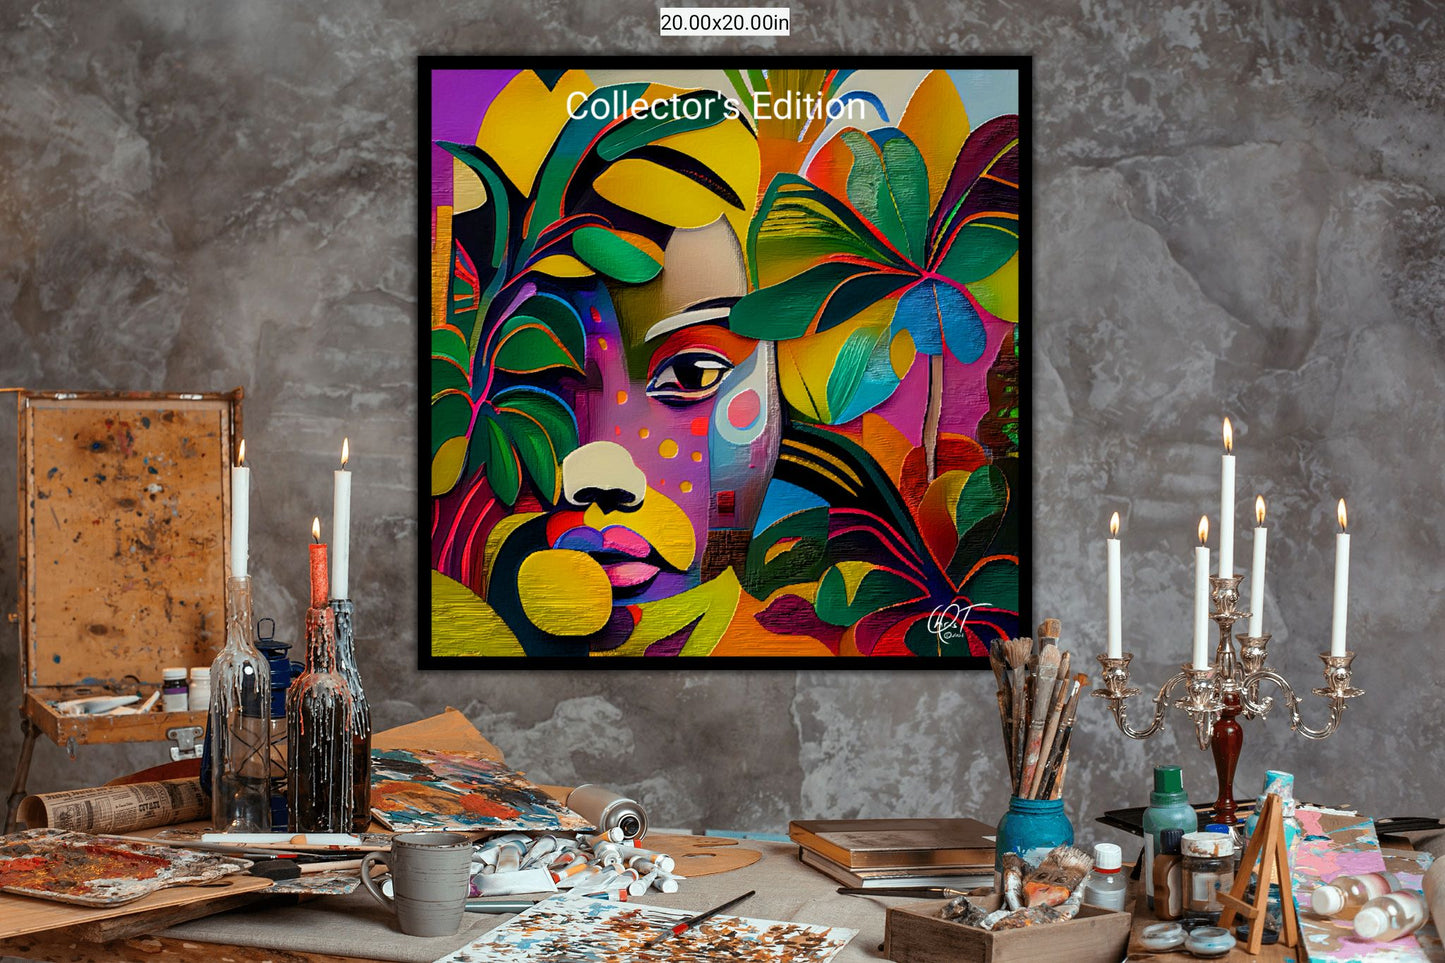 Oasis Giclee Framed Canvas - Collector's Edition - Exclusively at Walmart - Chris Thompkins